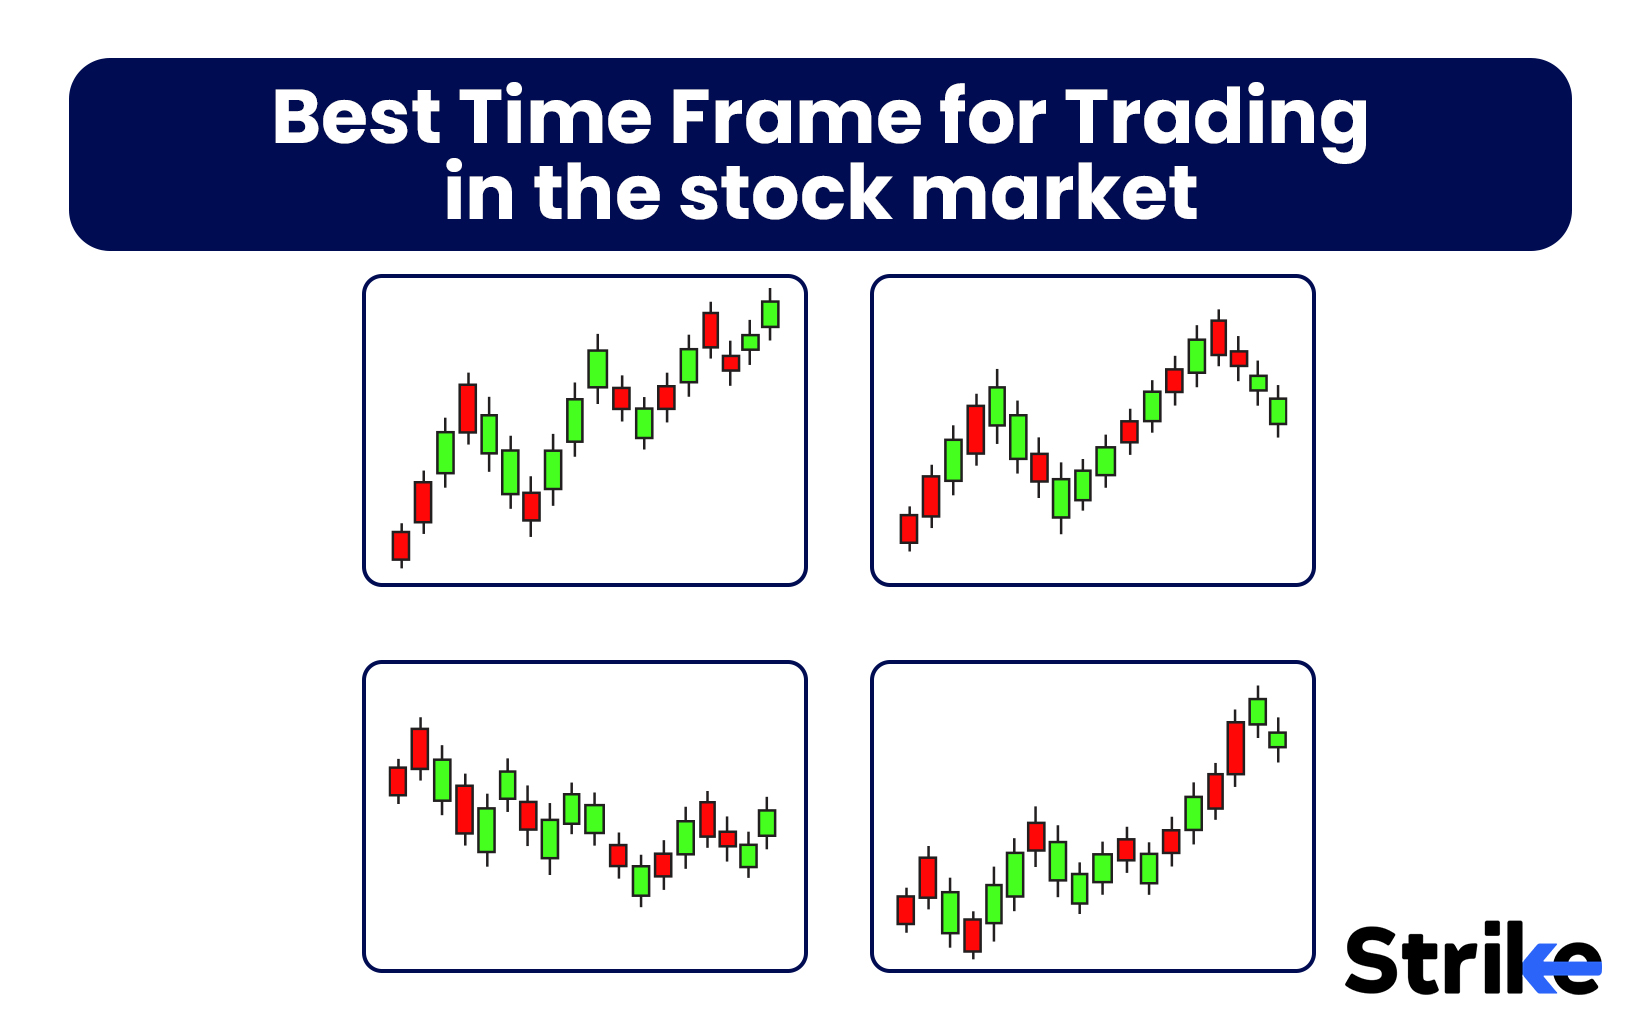 What is the Best Time Frame for Trading in the Stock Market?